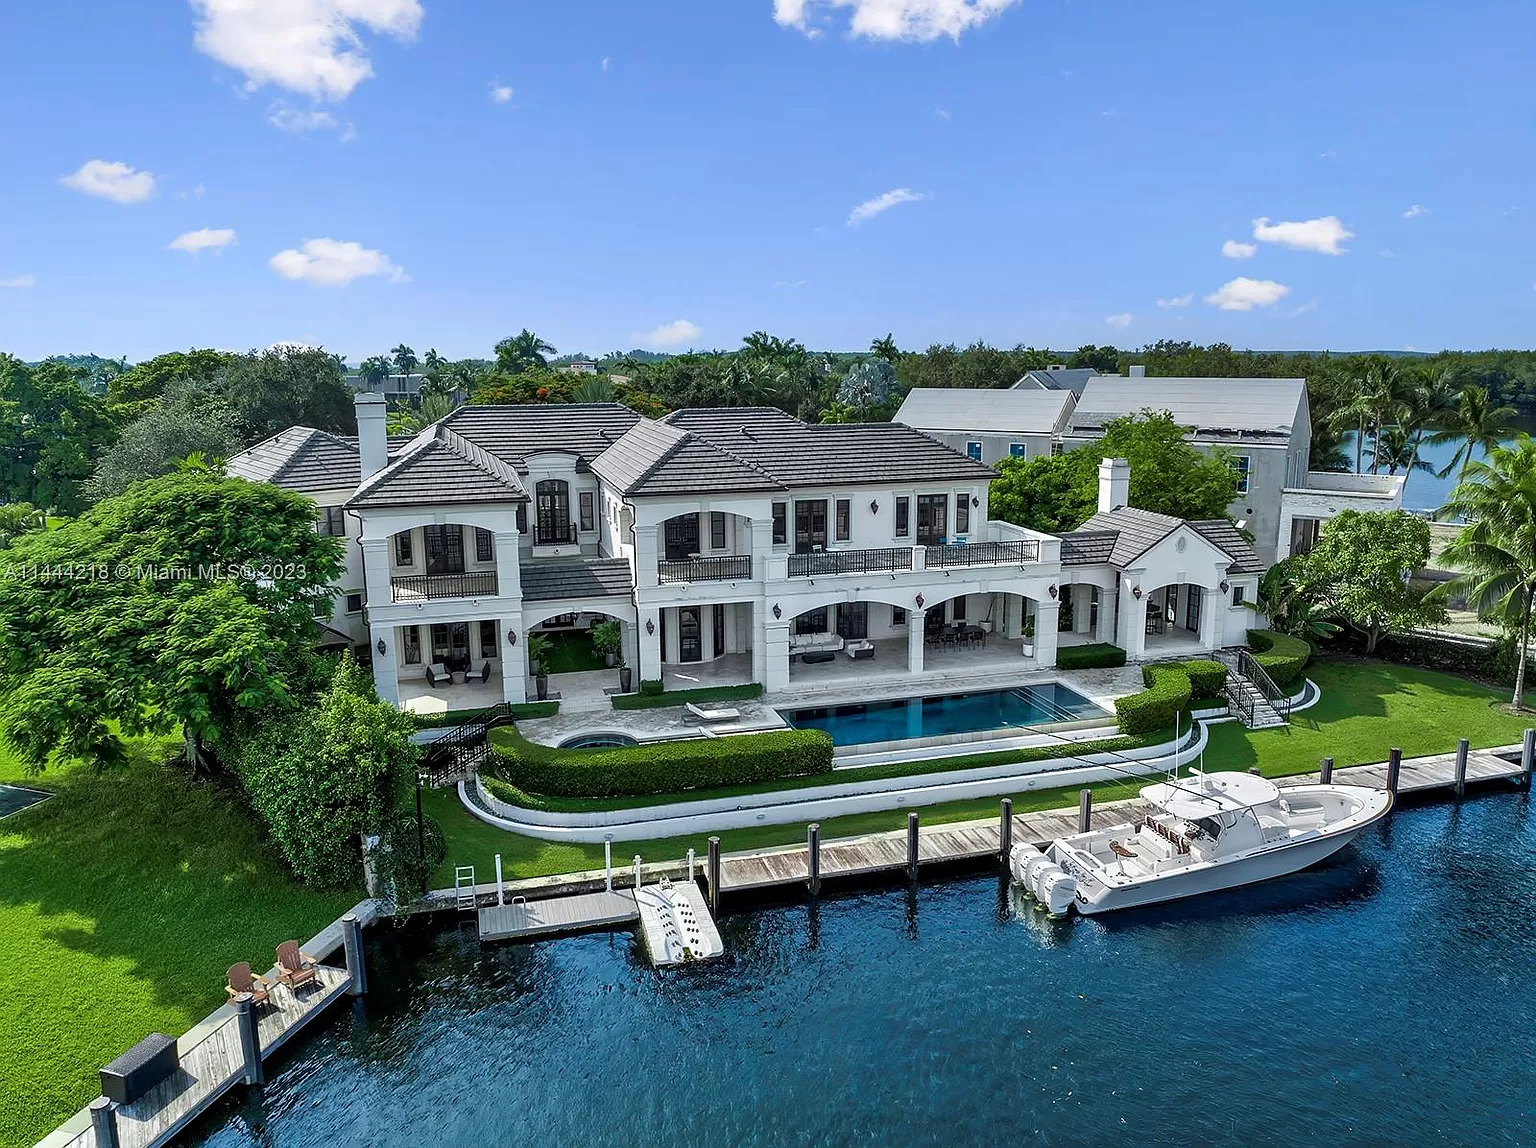 Coral Gables Now Boasts Most Expensive Homes in the USA taking over Beverly Hills